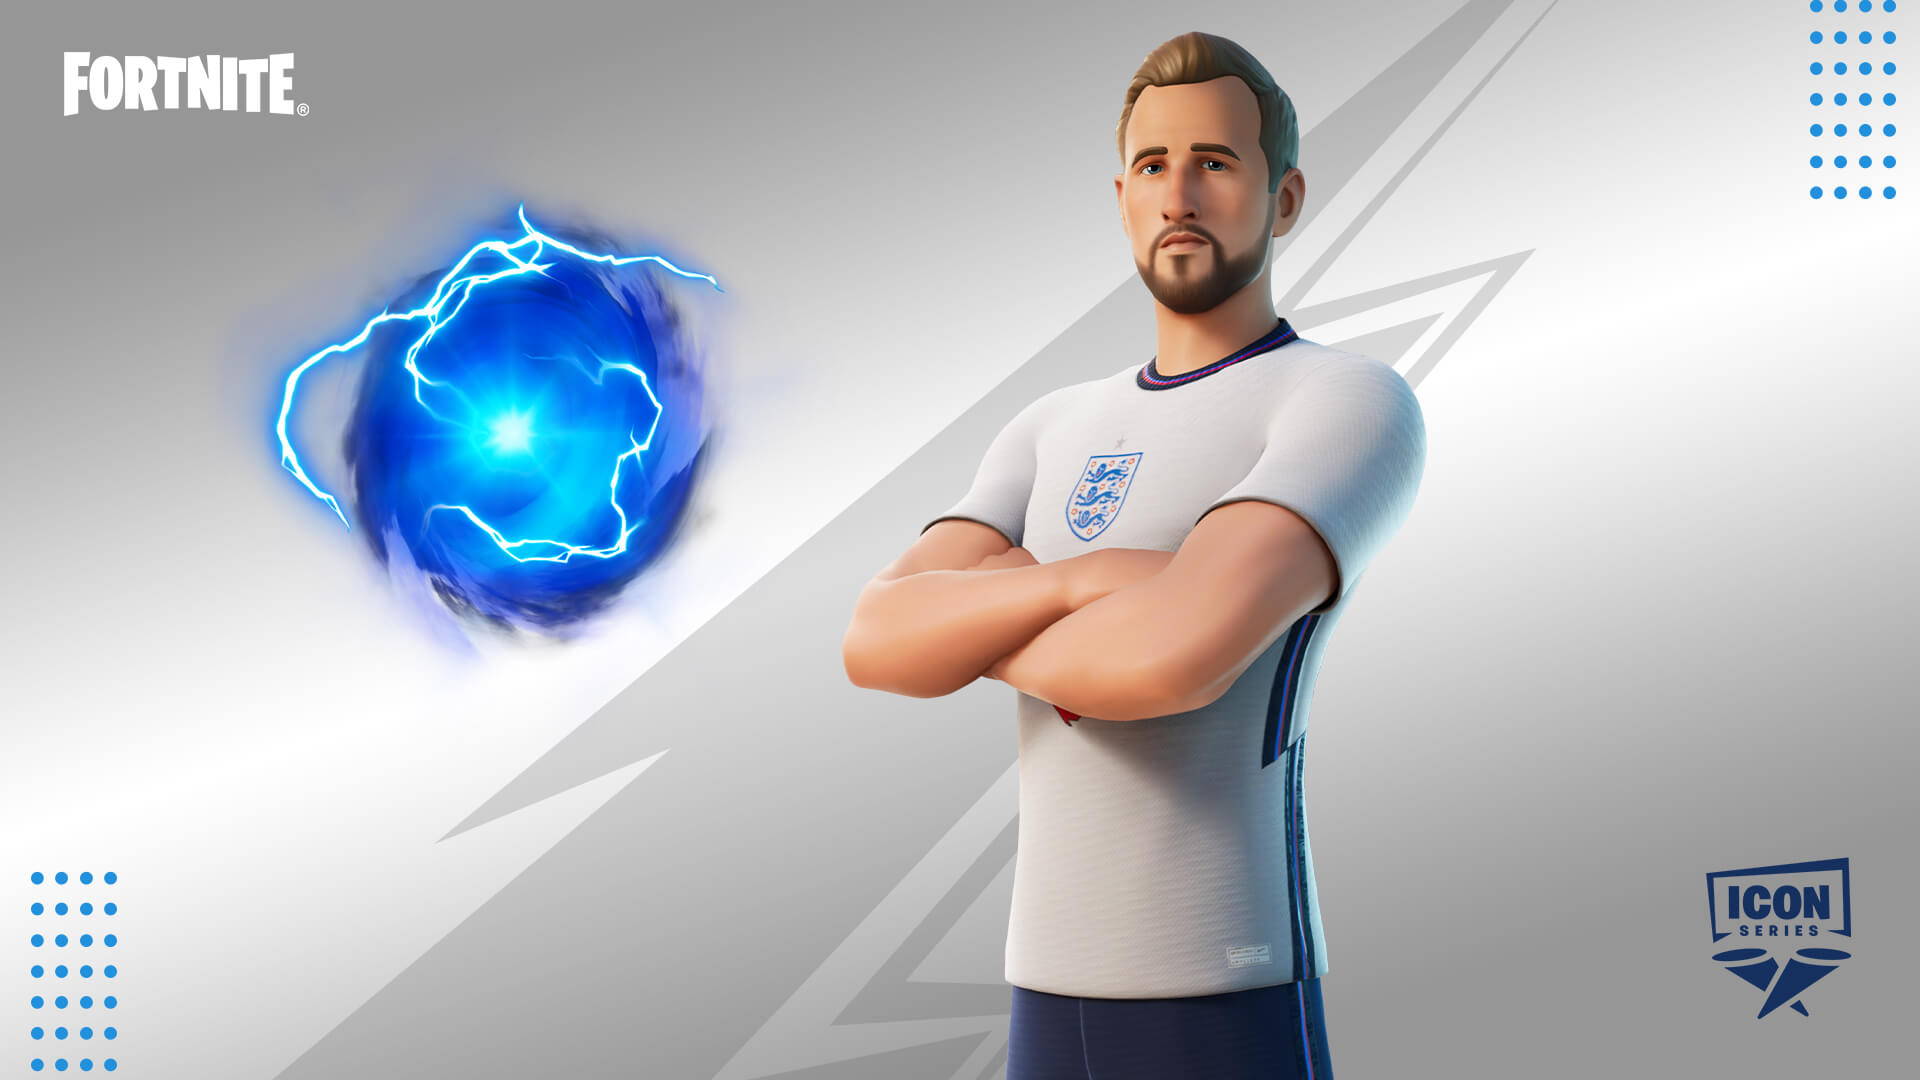 Football icons Harry Kane and Marco Reus return to the Fortnite Item Shop